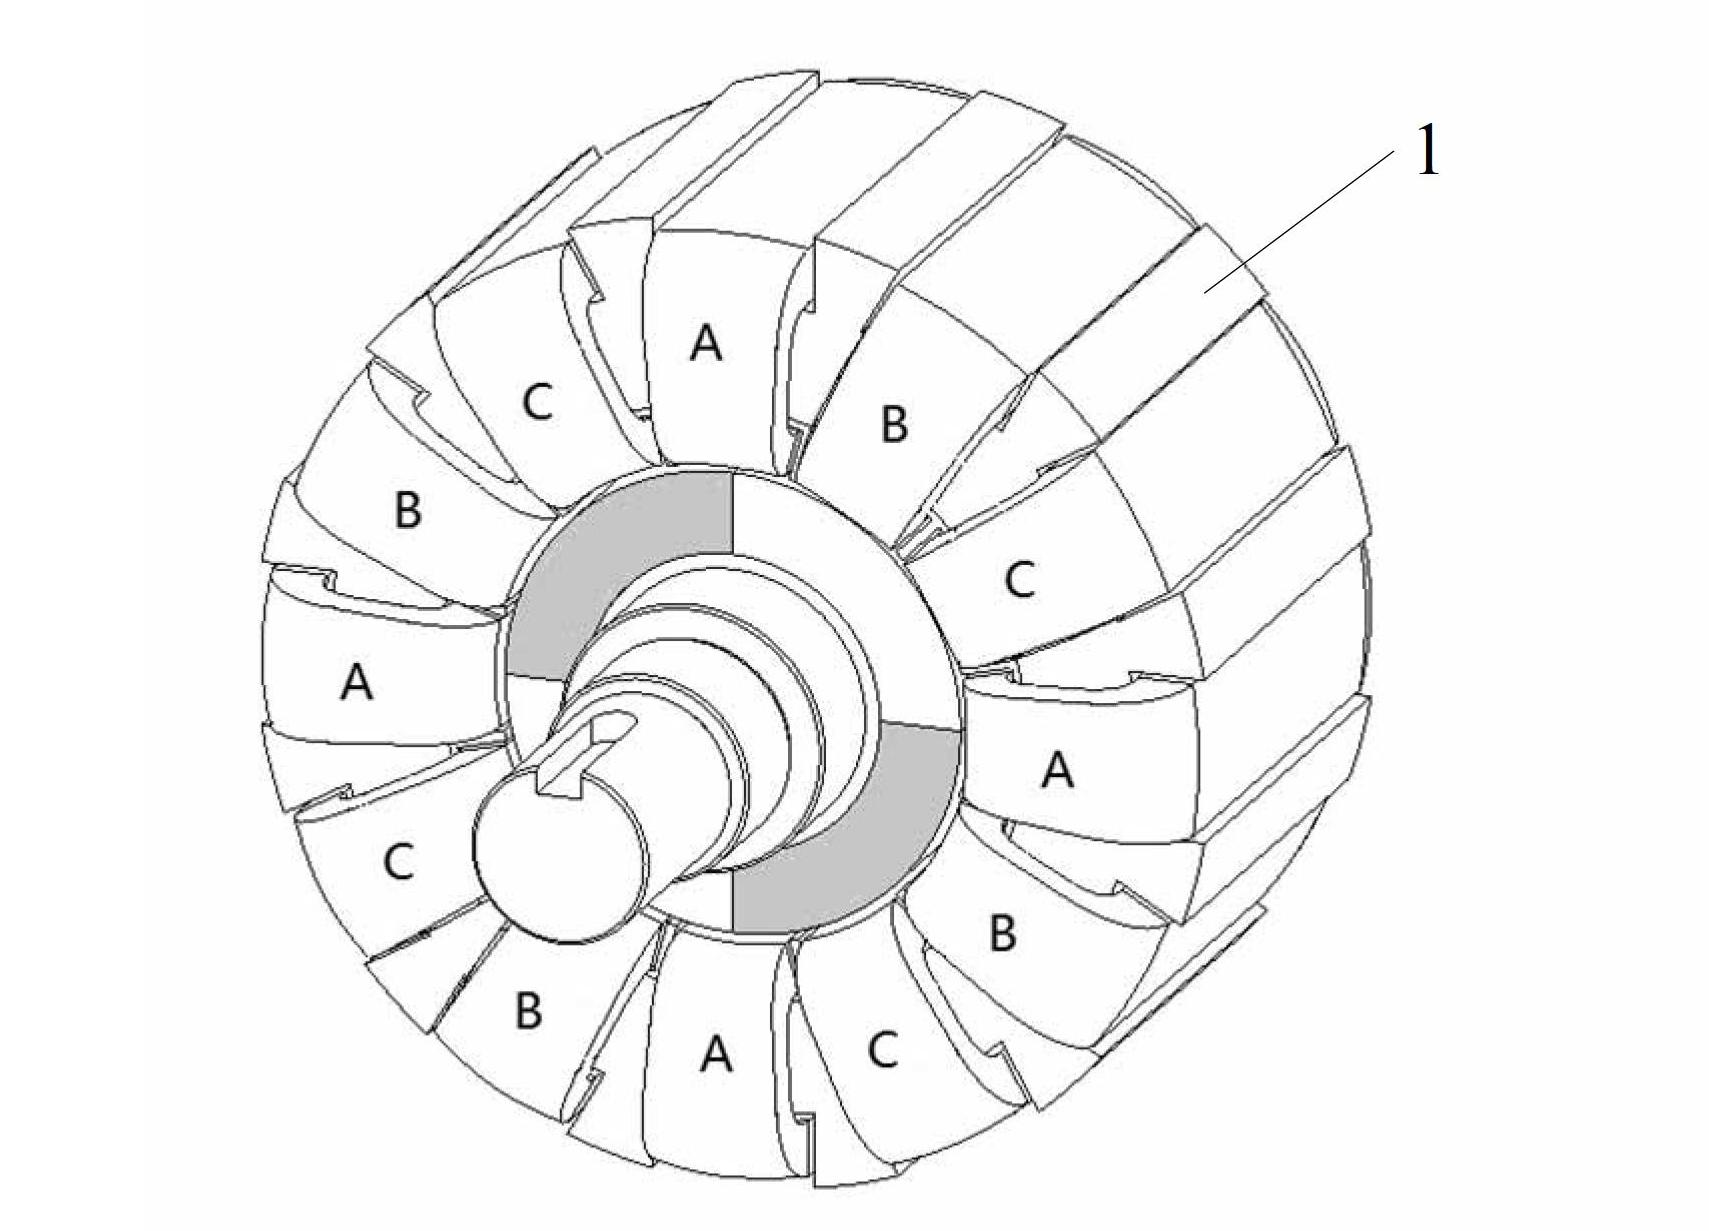 Polyphase permanent magnet motor with leakage reactance adjustable structure